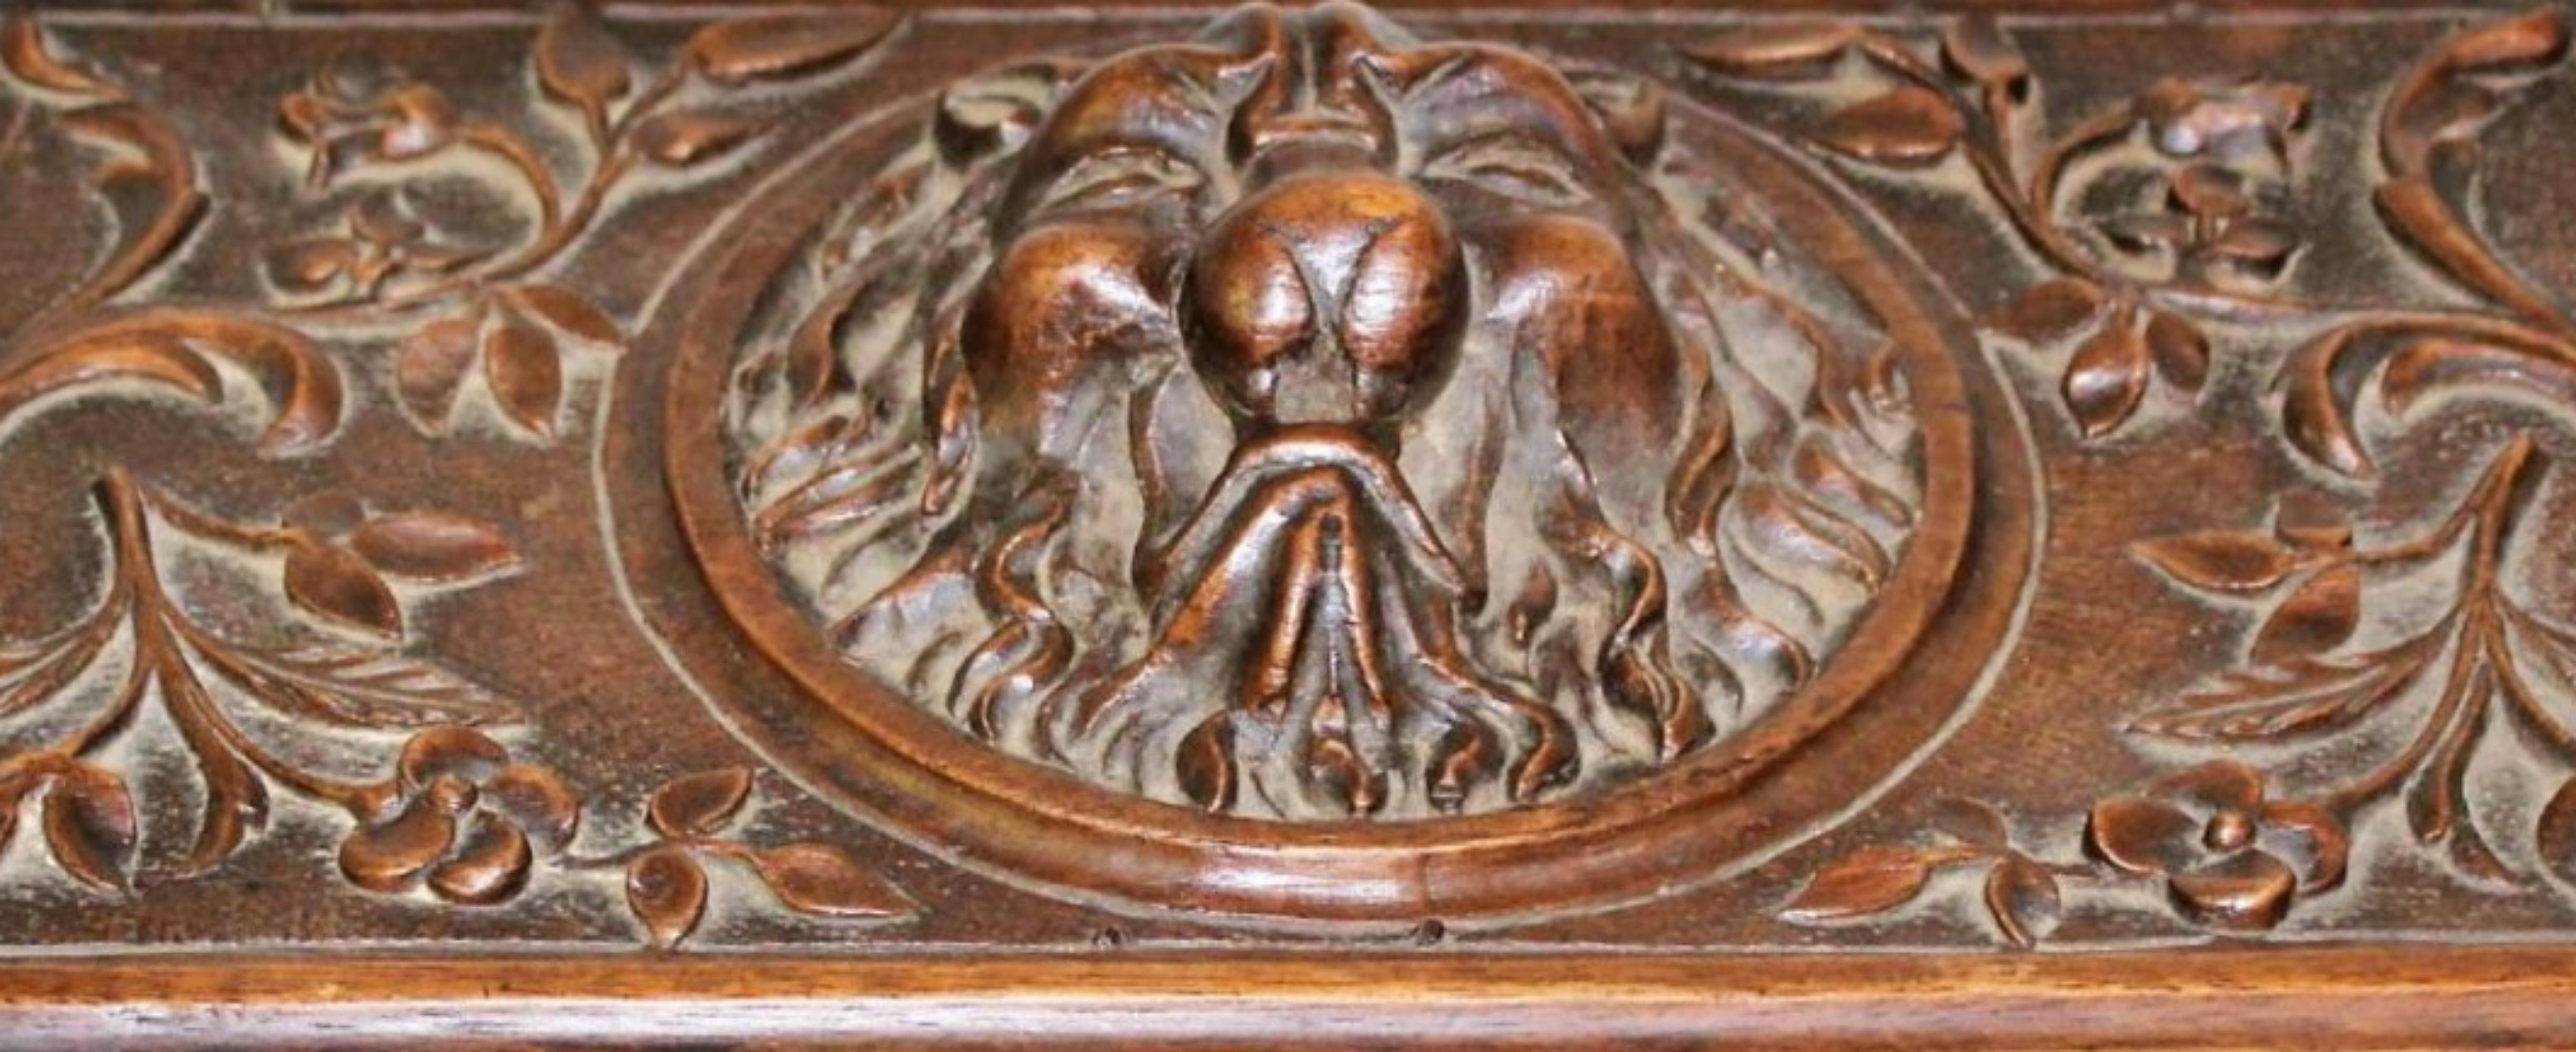 Hand-Crafted Italian Box in High Relief Carved Oak Wood 18th Century For Sale